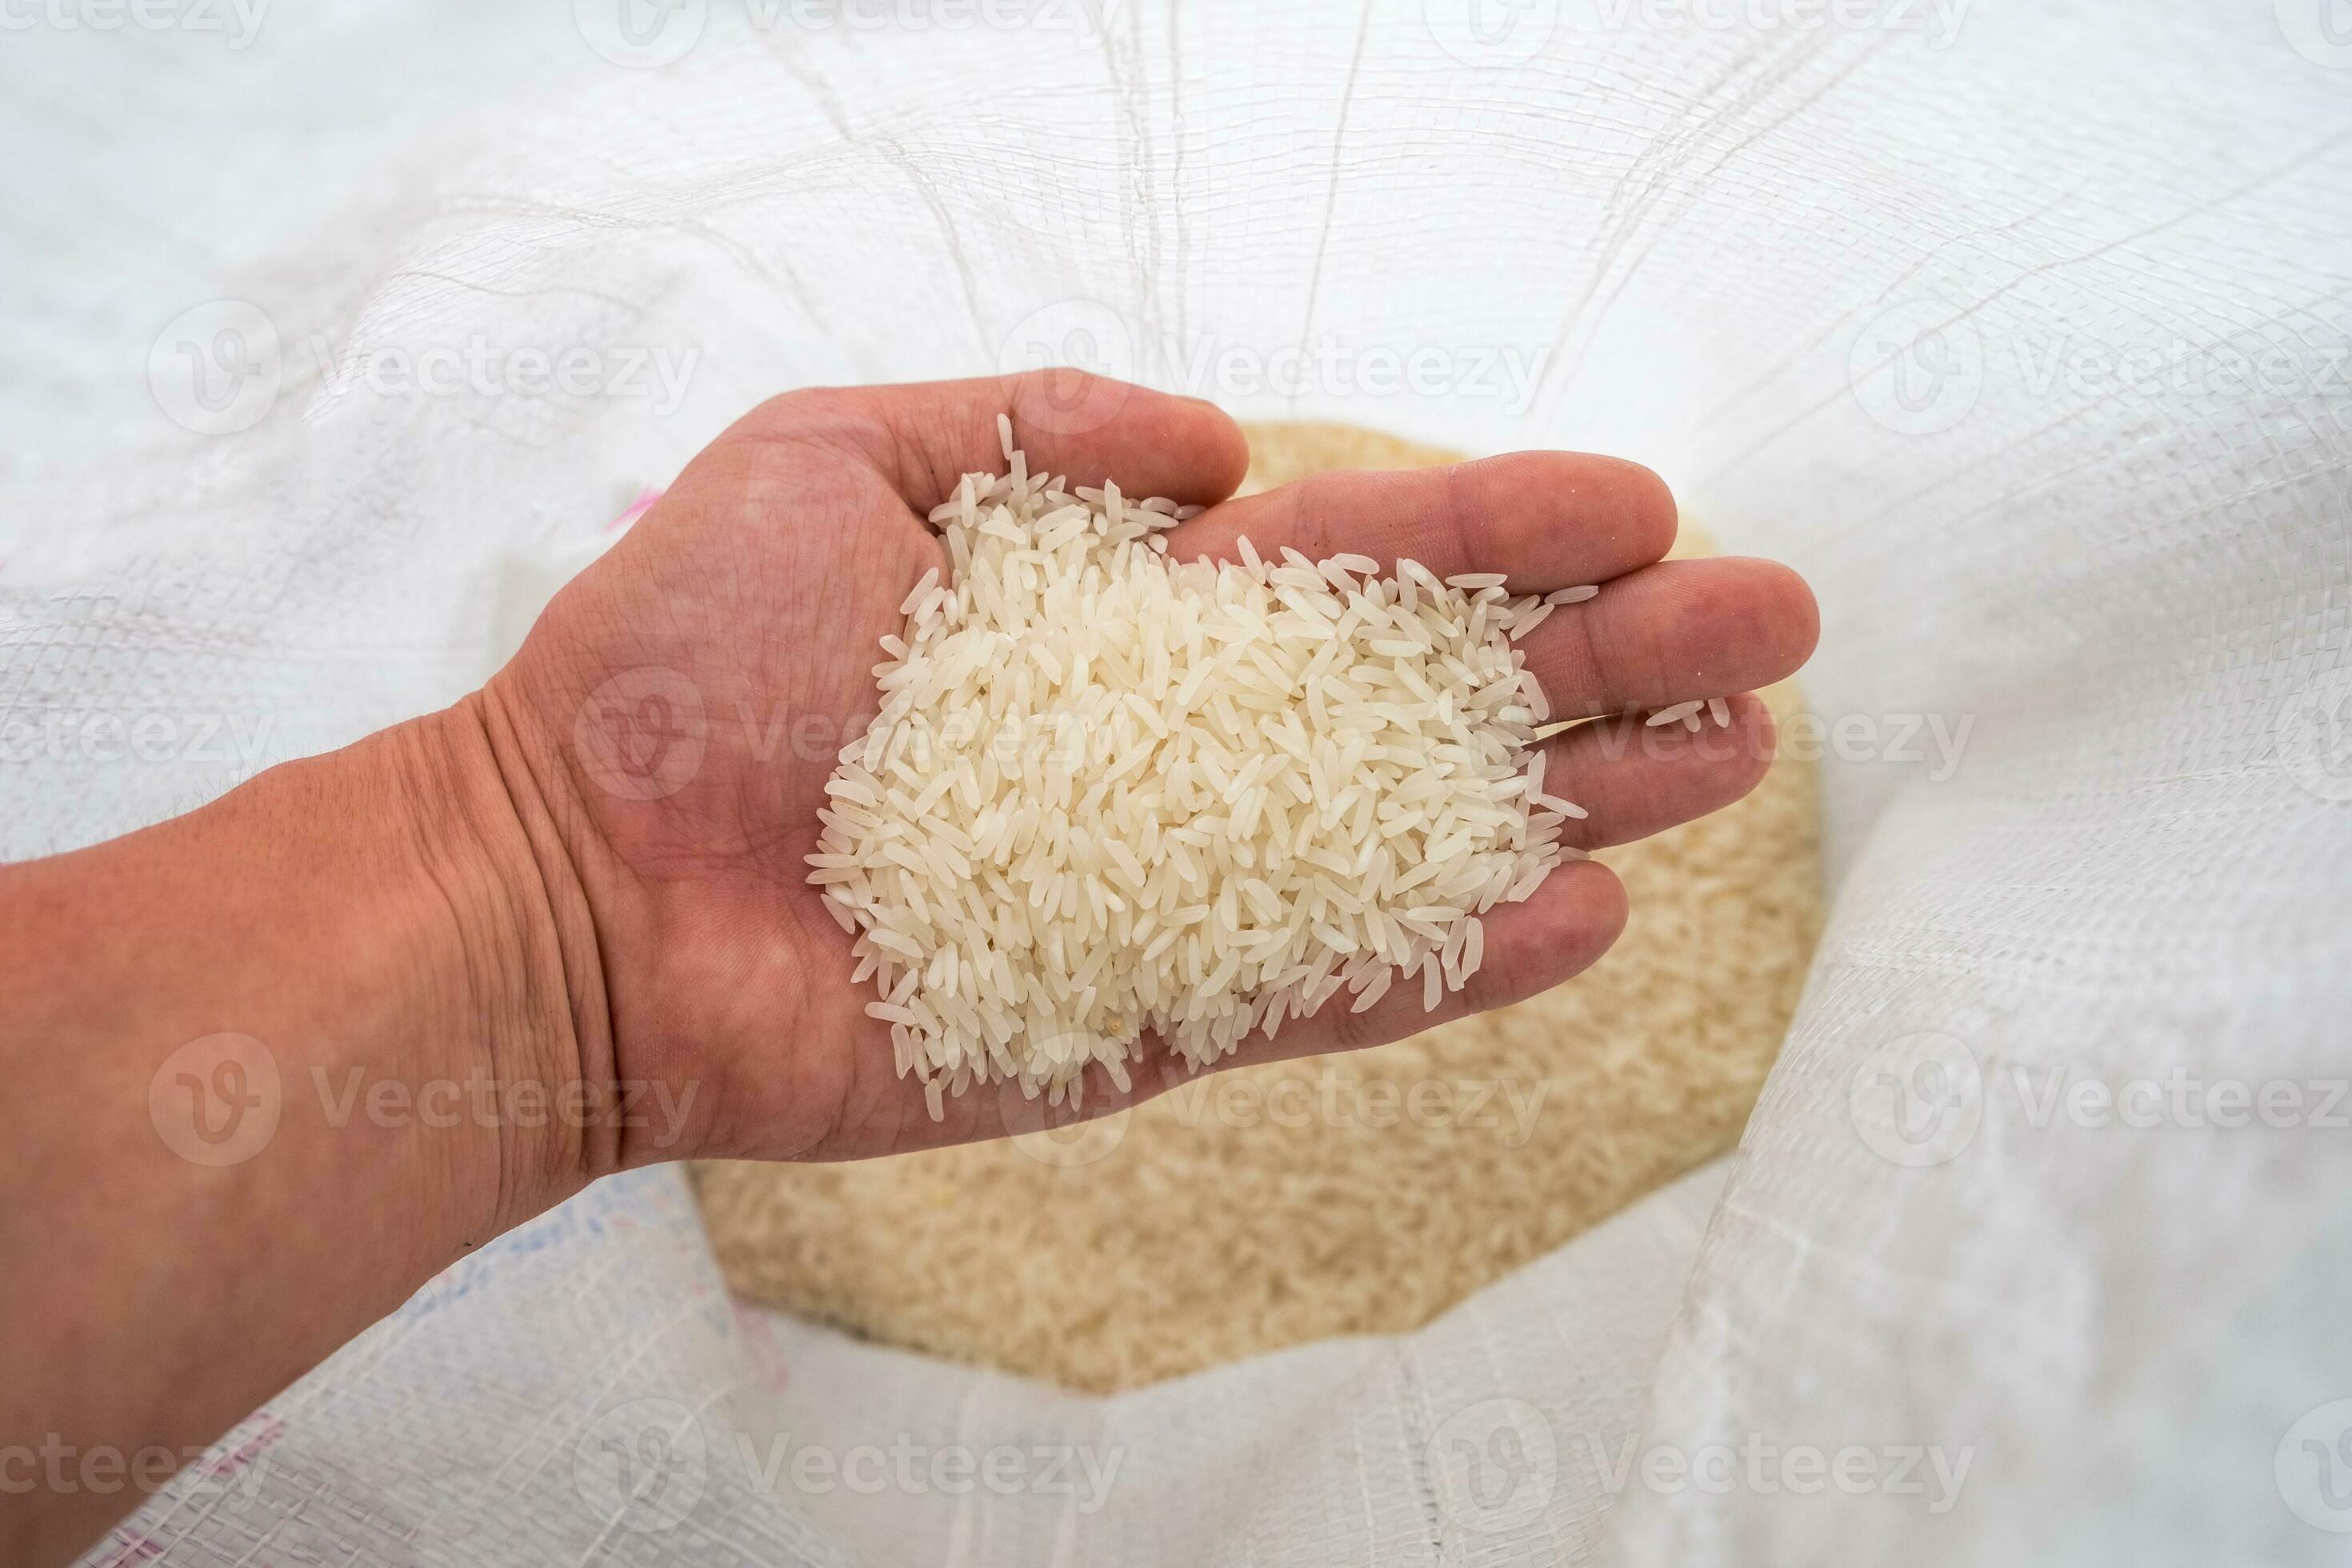 The Scoop on Rice